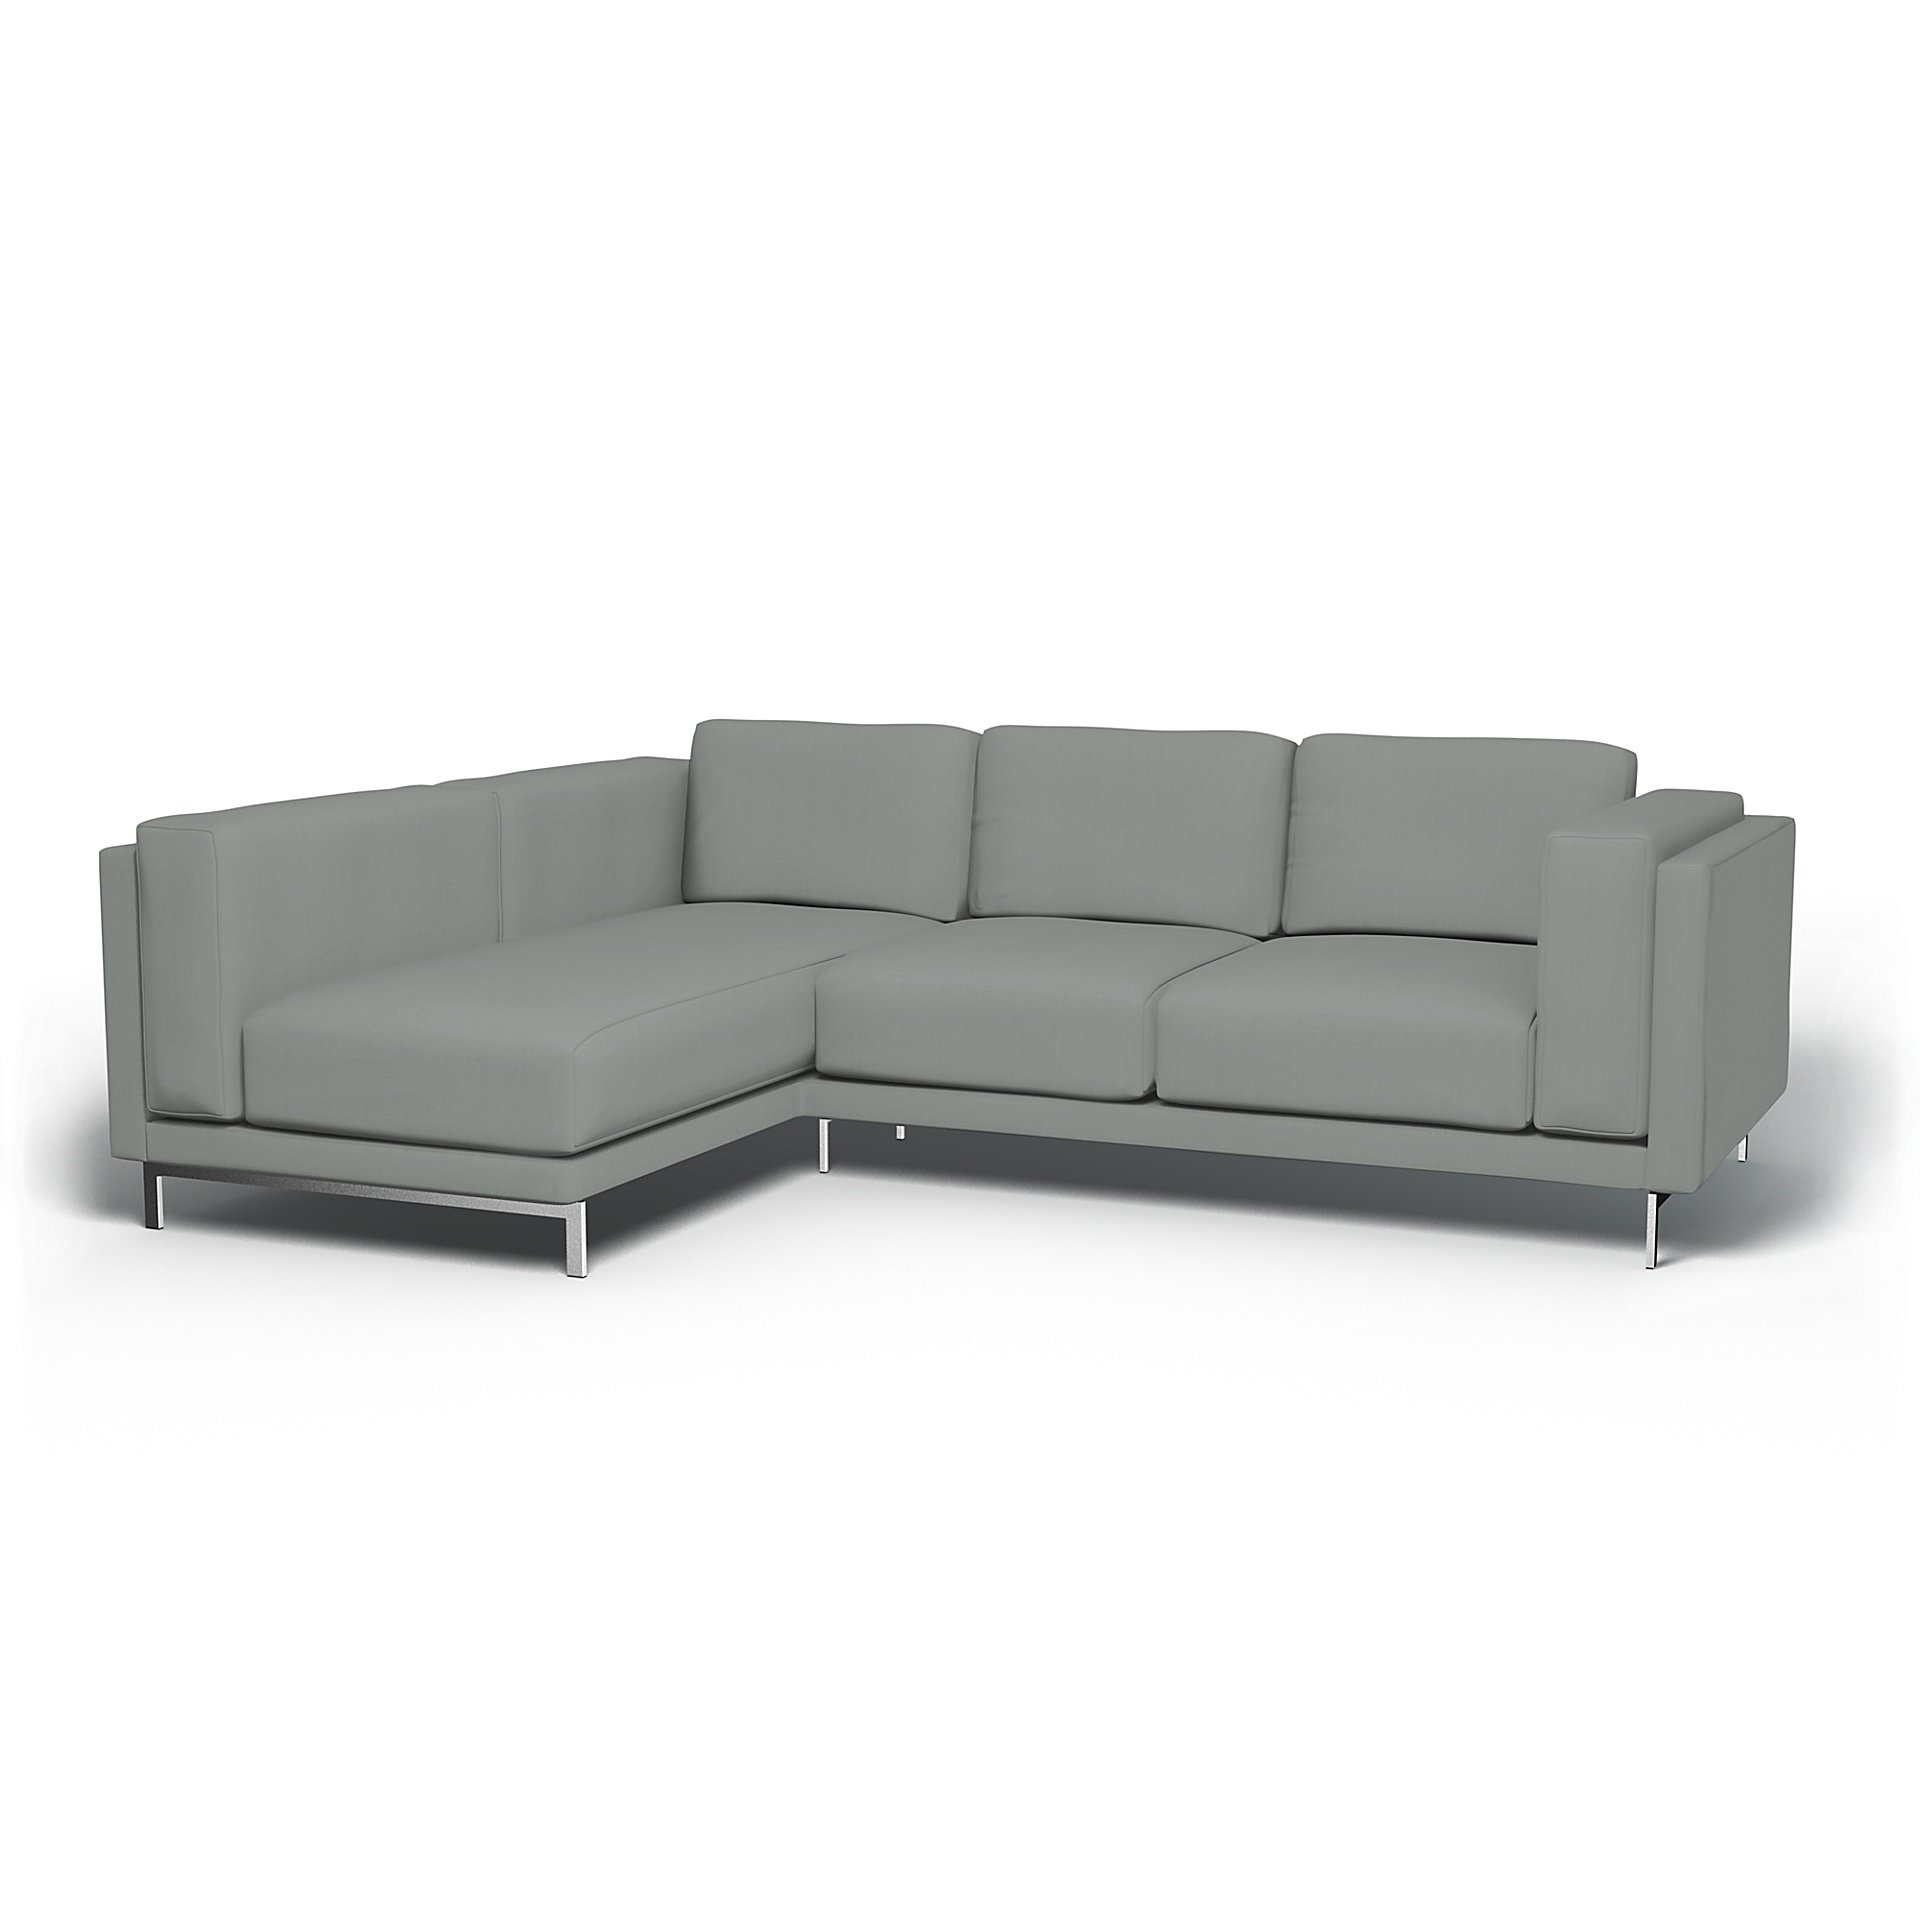 IKEA - Nockeby 3 Seater Sofa with Left Chaise Cover, Drizzle, Cotton - Bemz